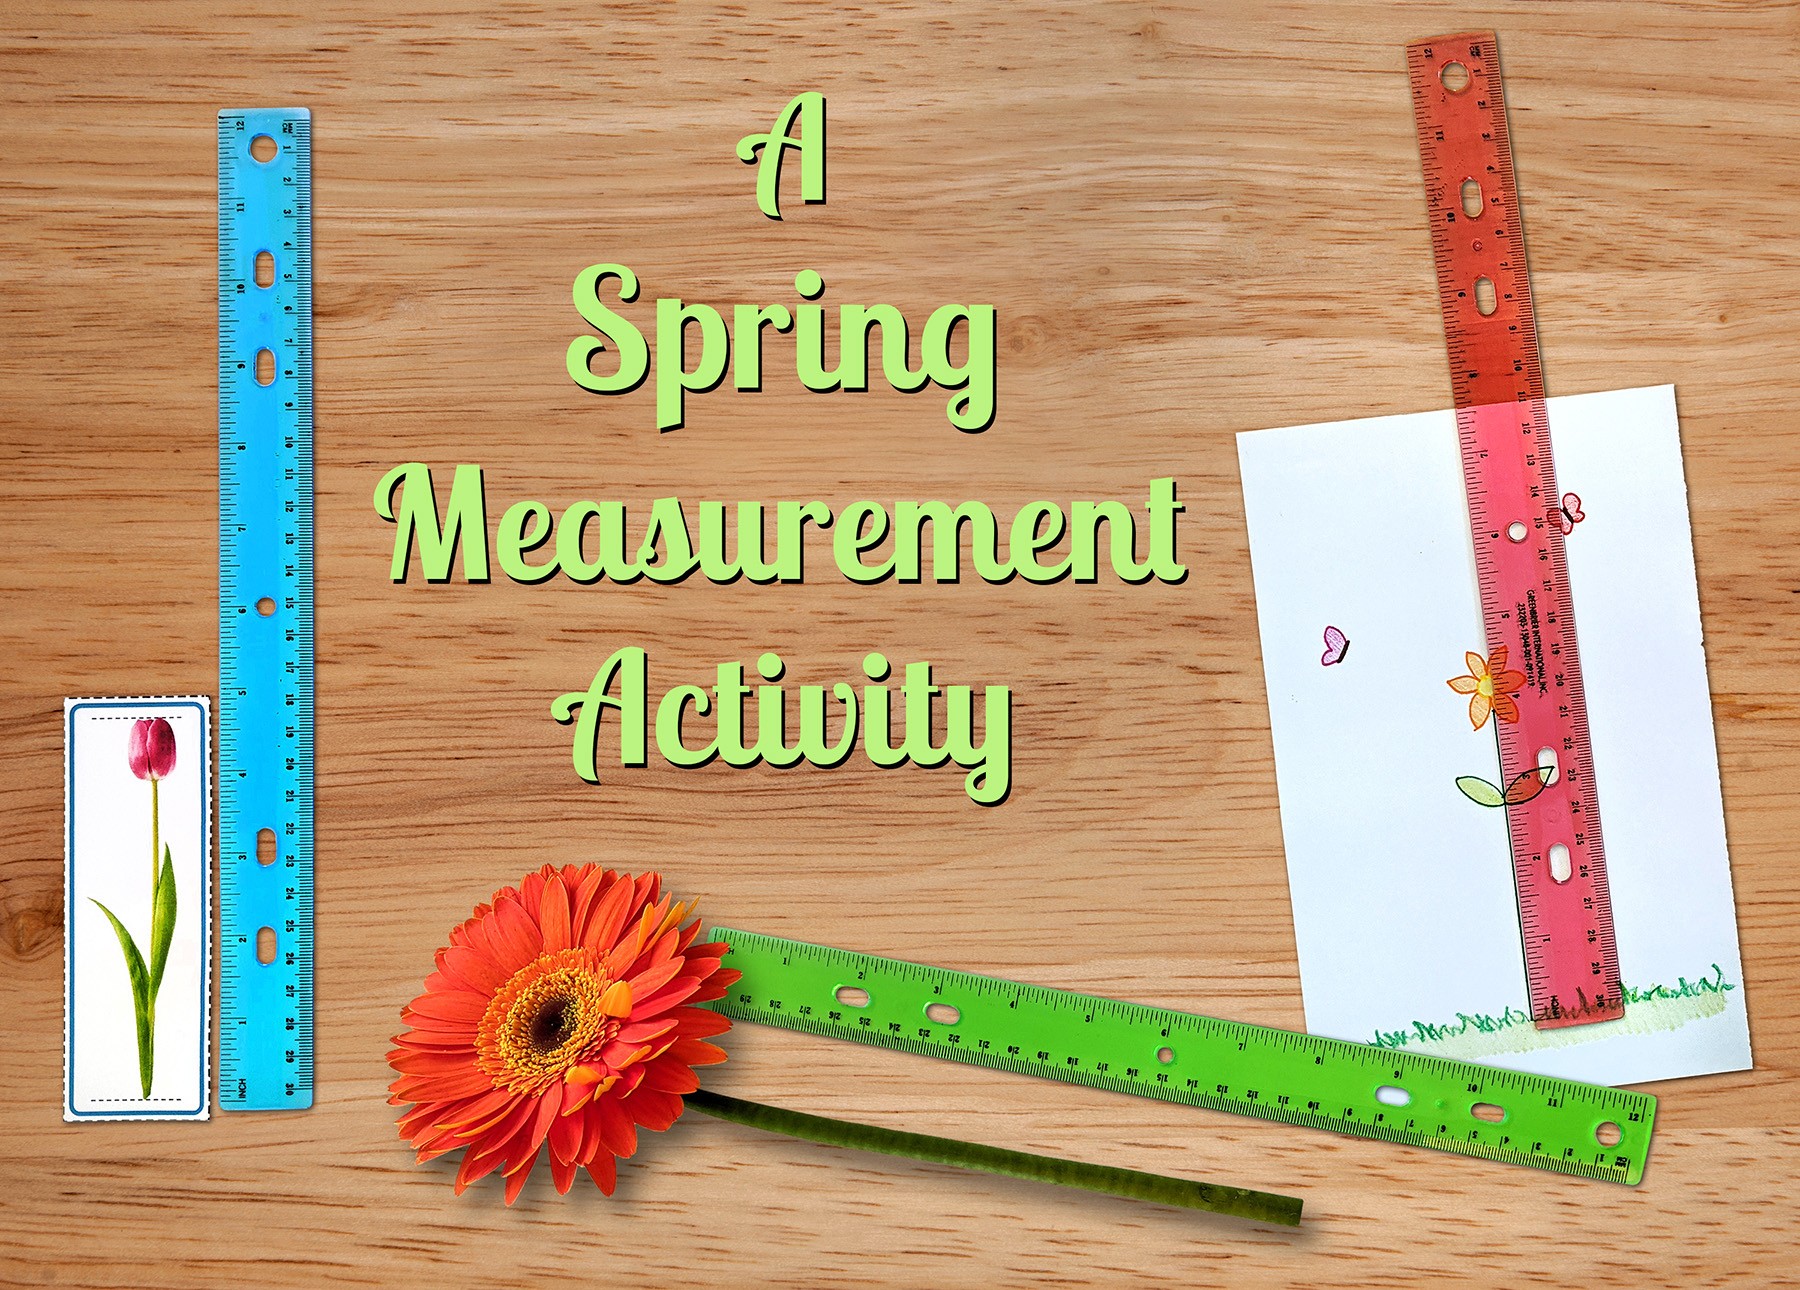 Measurement Activity for Spring